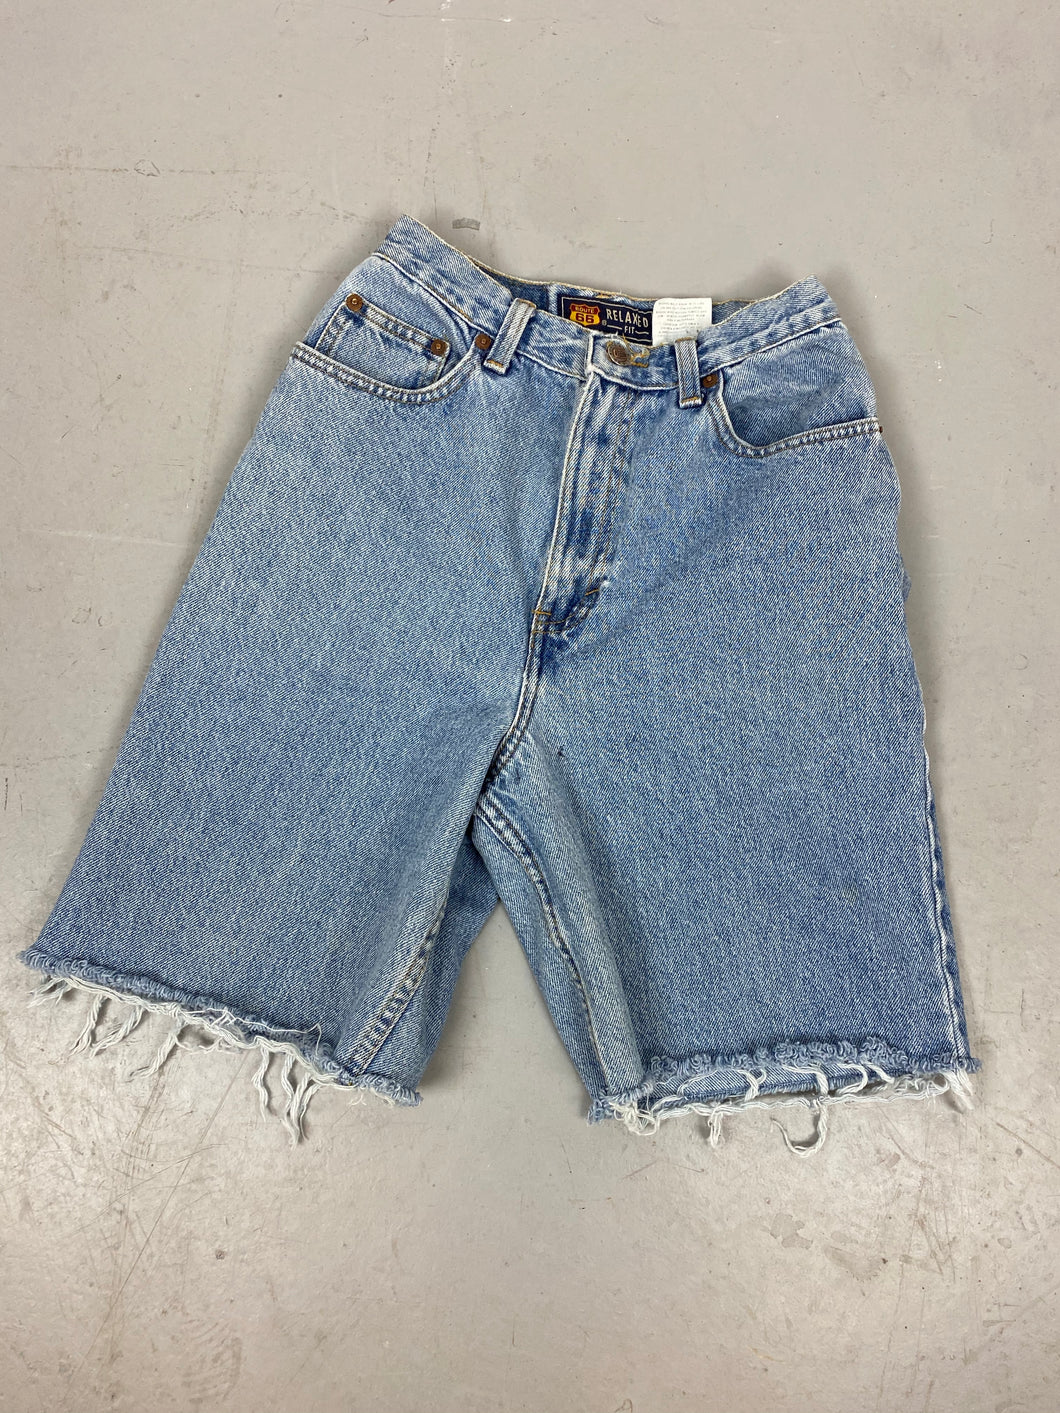 90s high waisted limited denim shorts - 27in